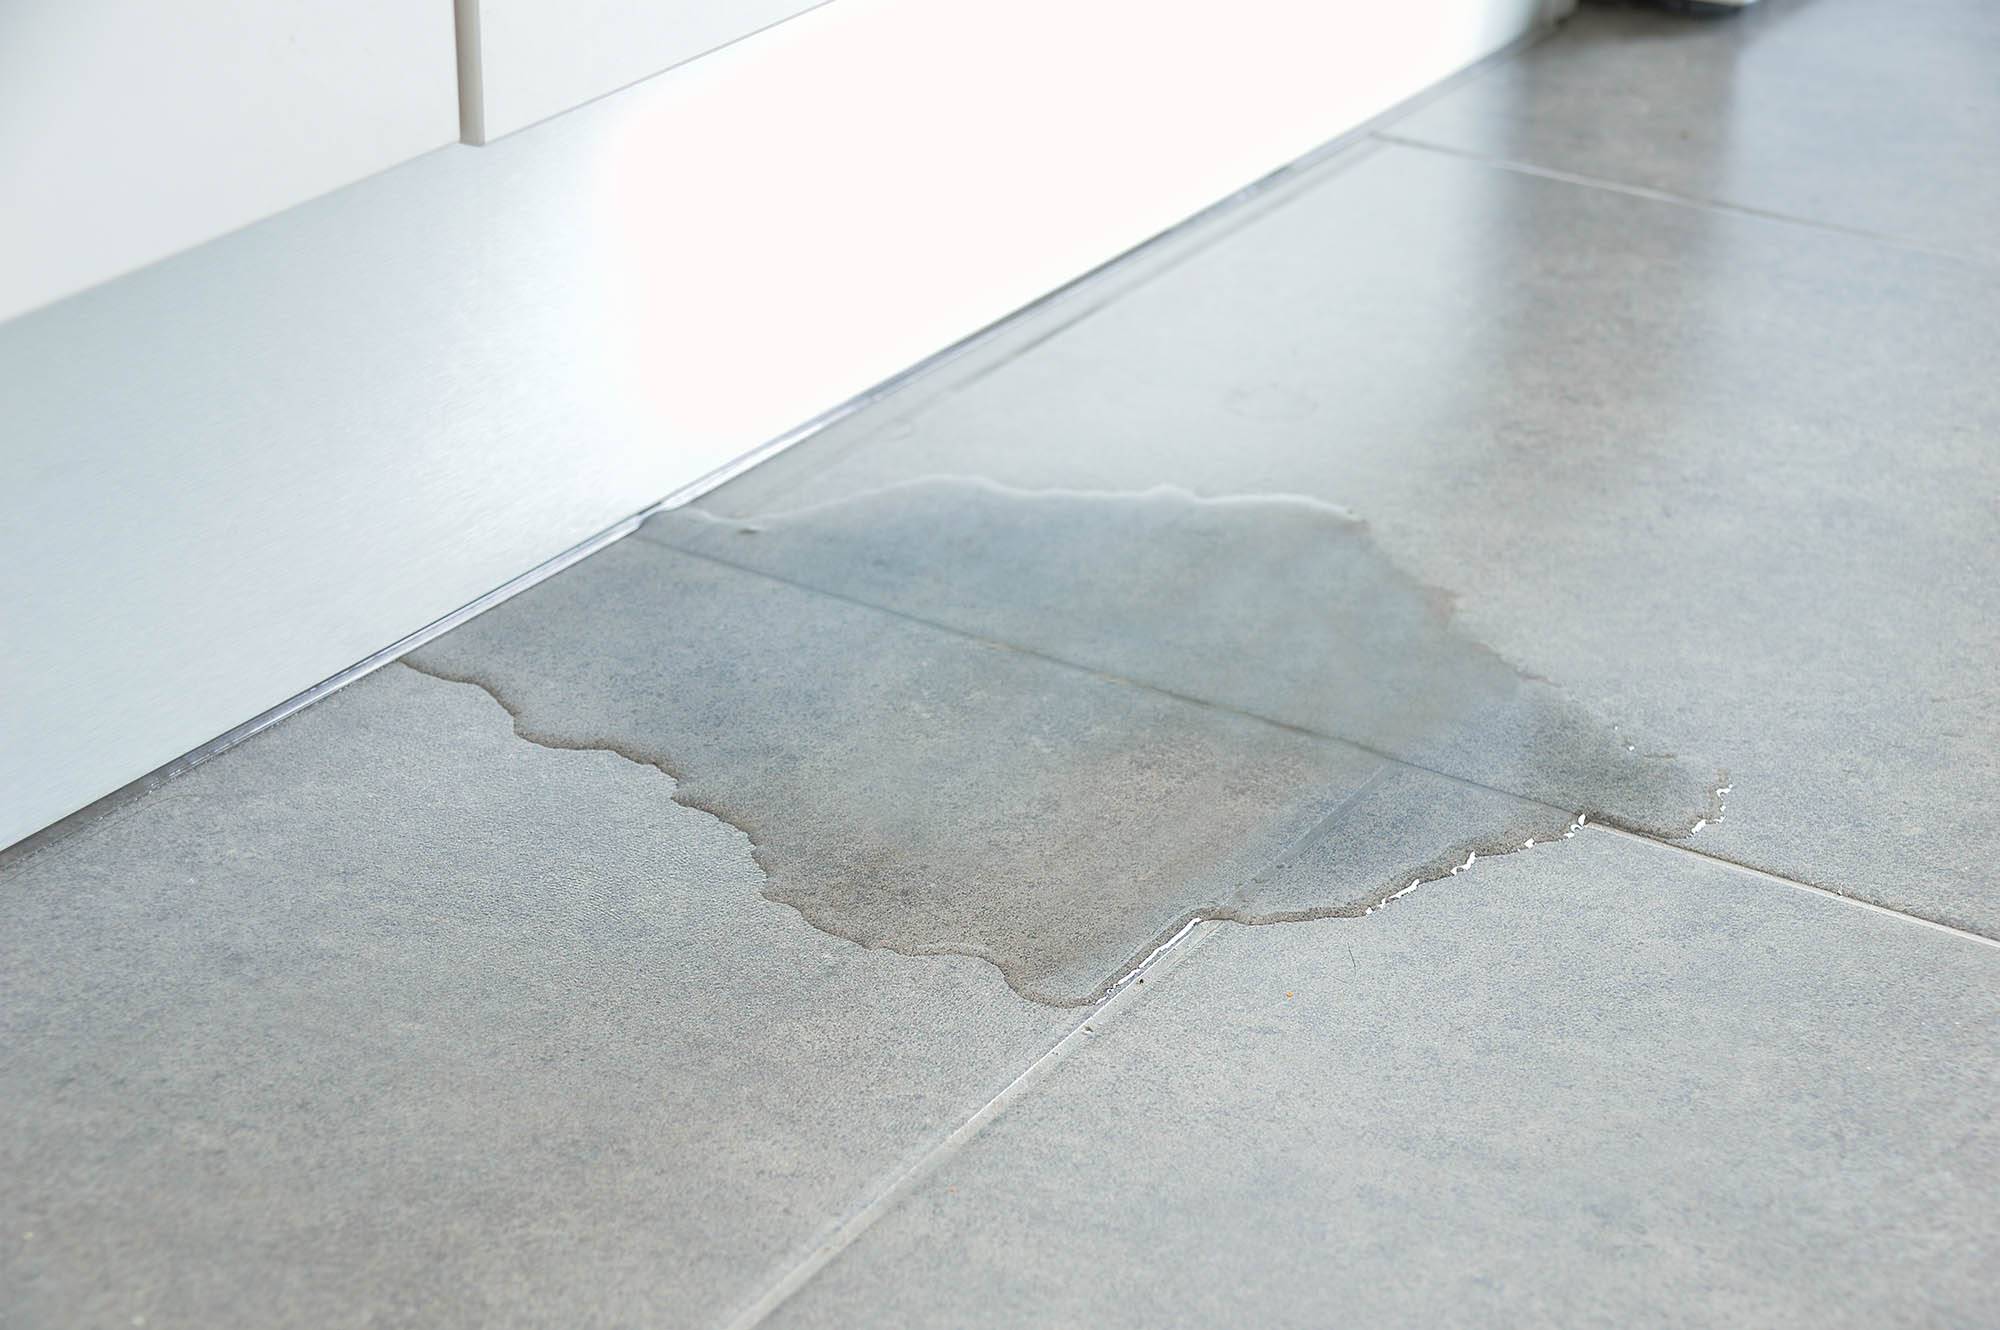 Slab Leaks: What Causes Them and How to Repair Them